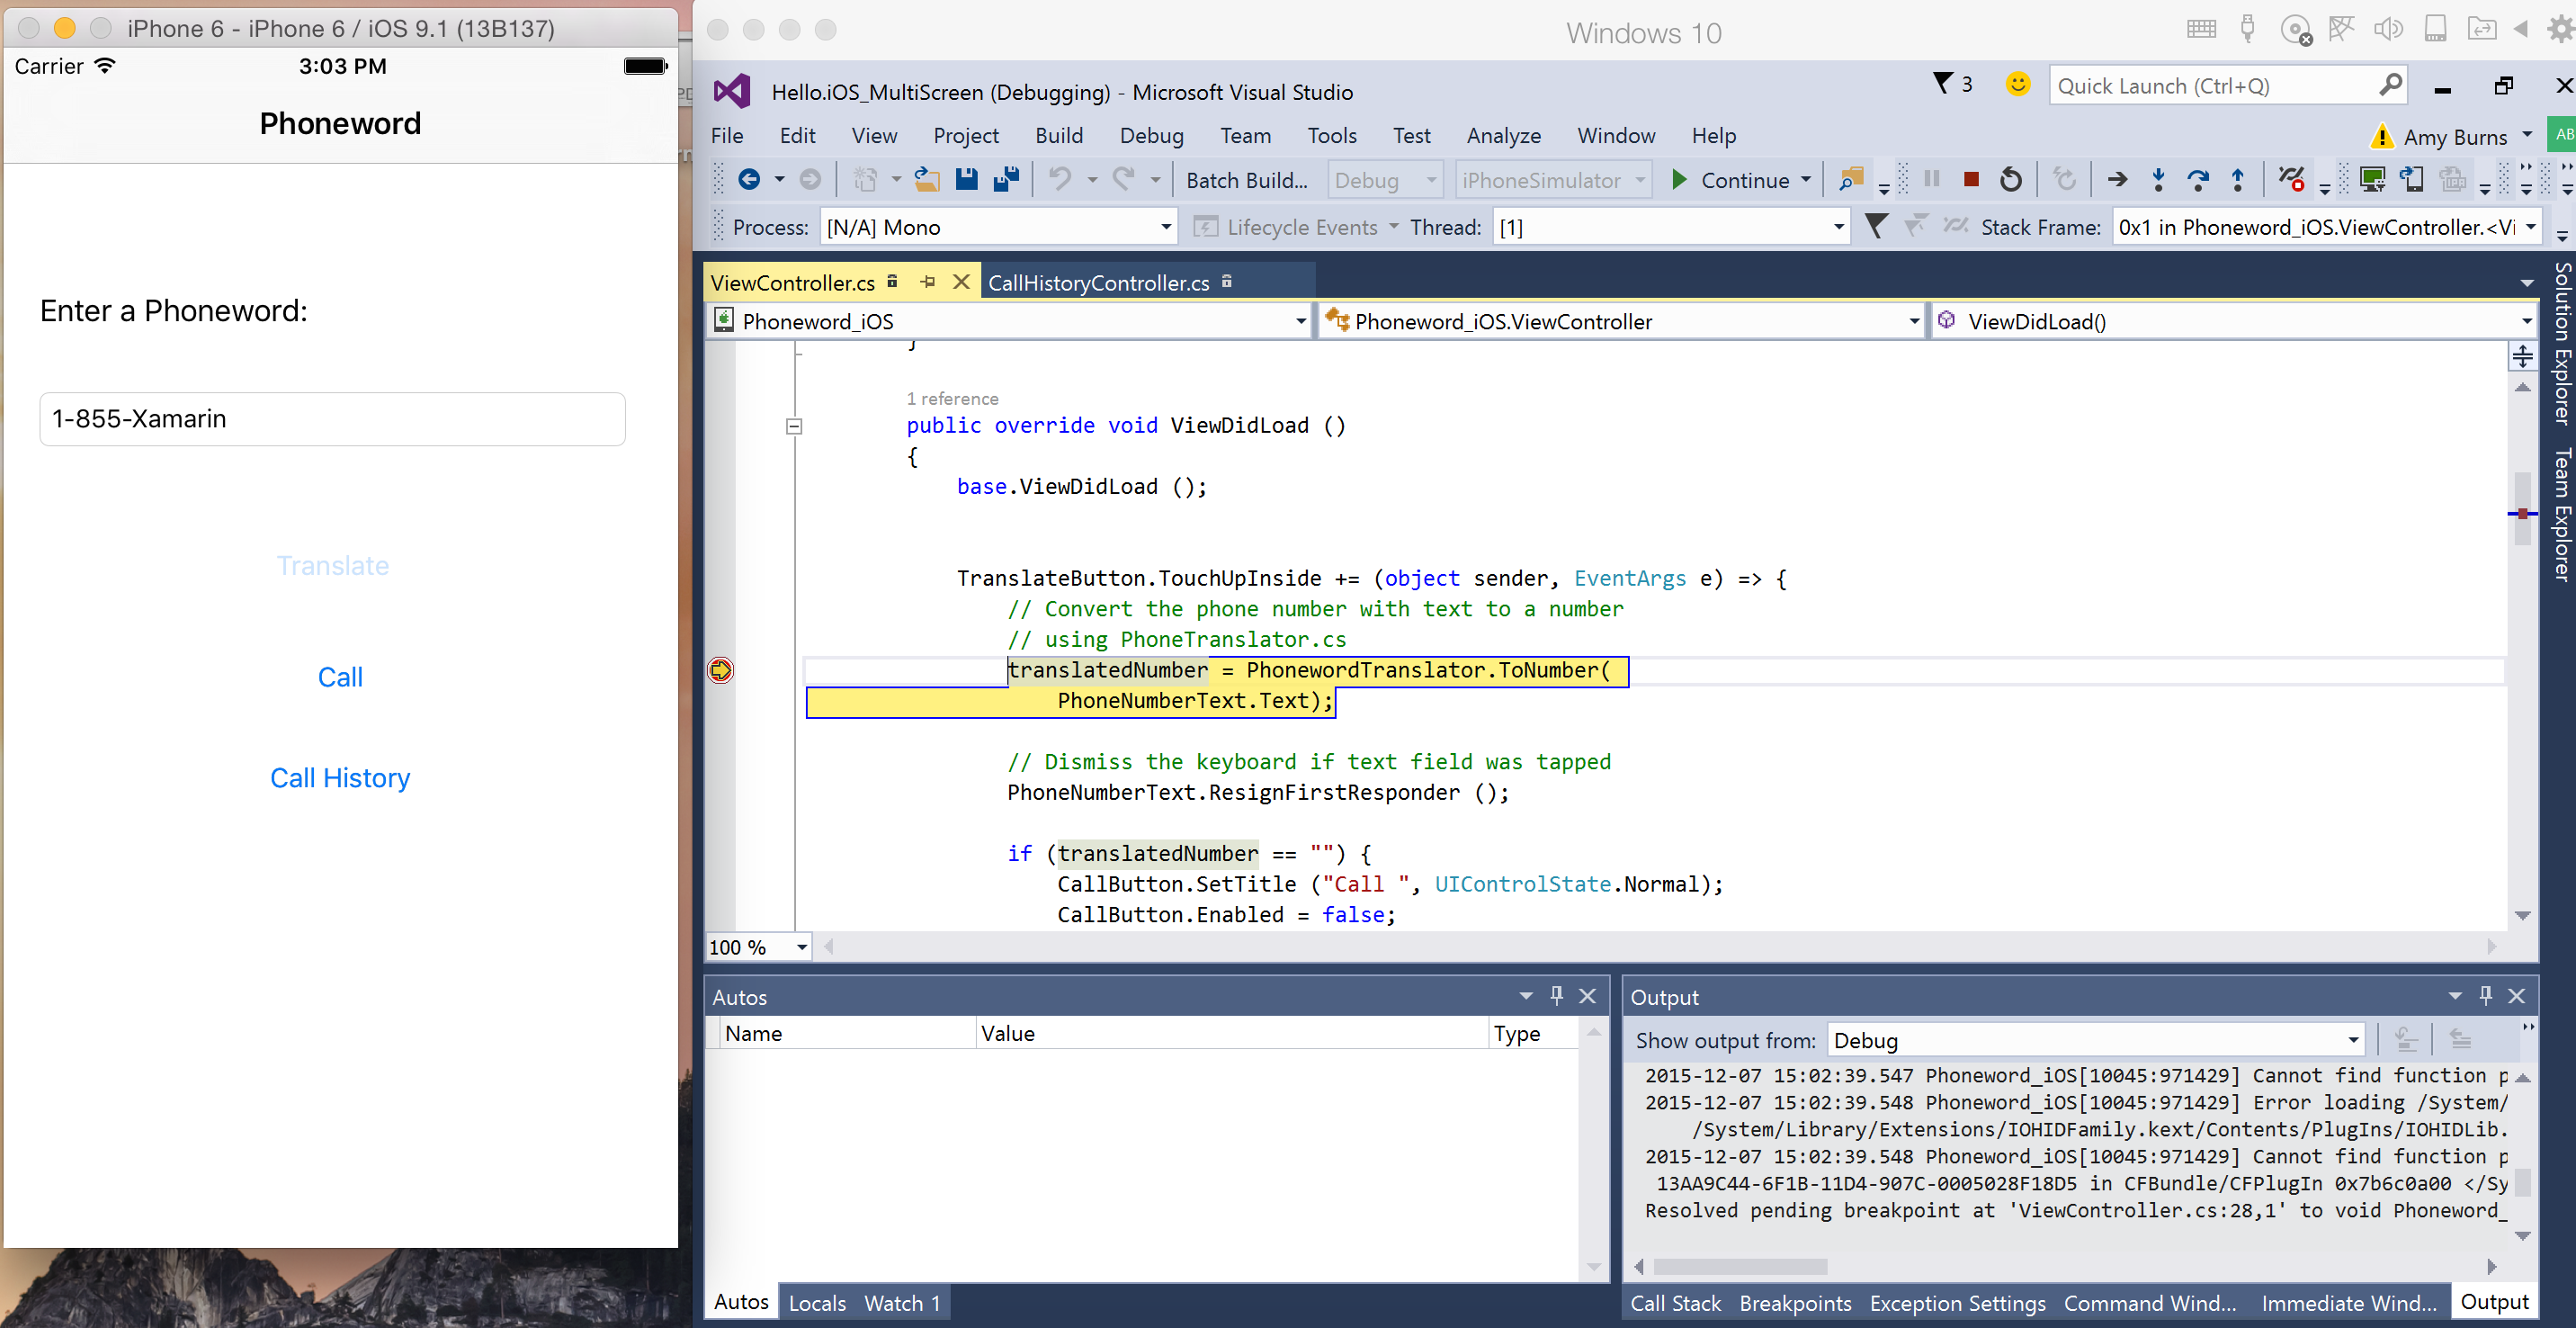 This screenshot shows the iOS Simulator running next to Visual Studio using Parallels on macOS